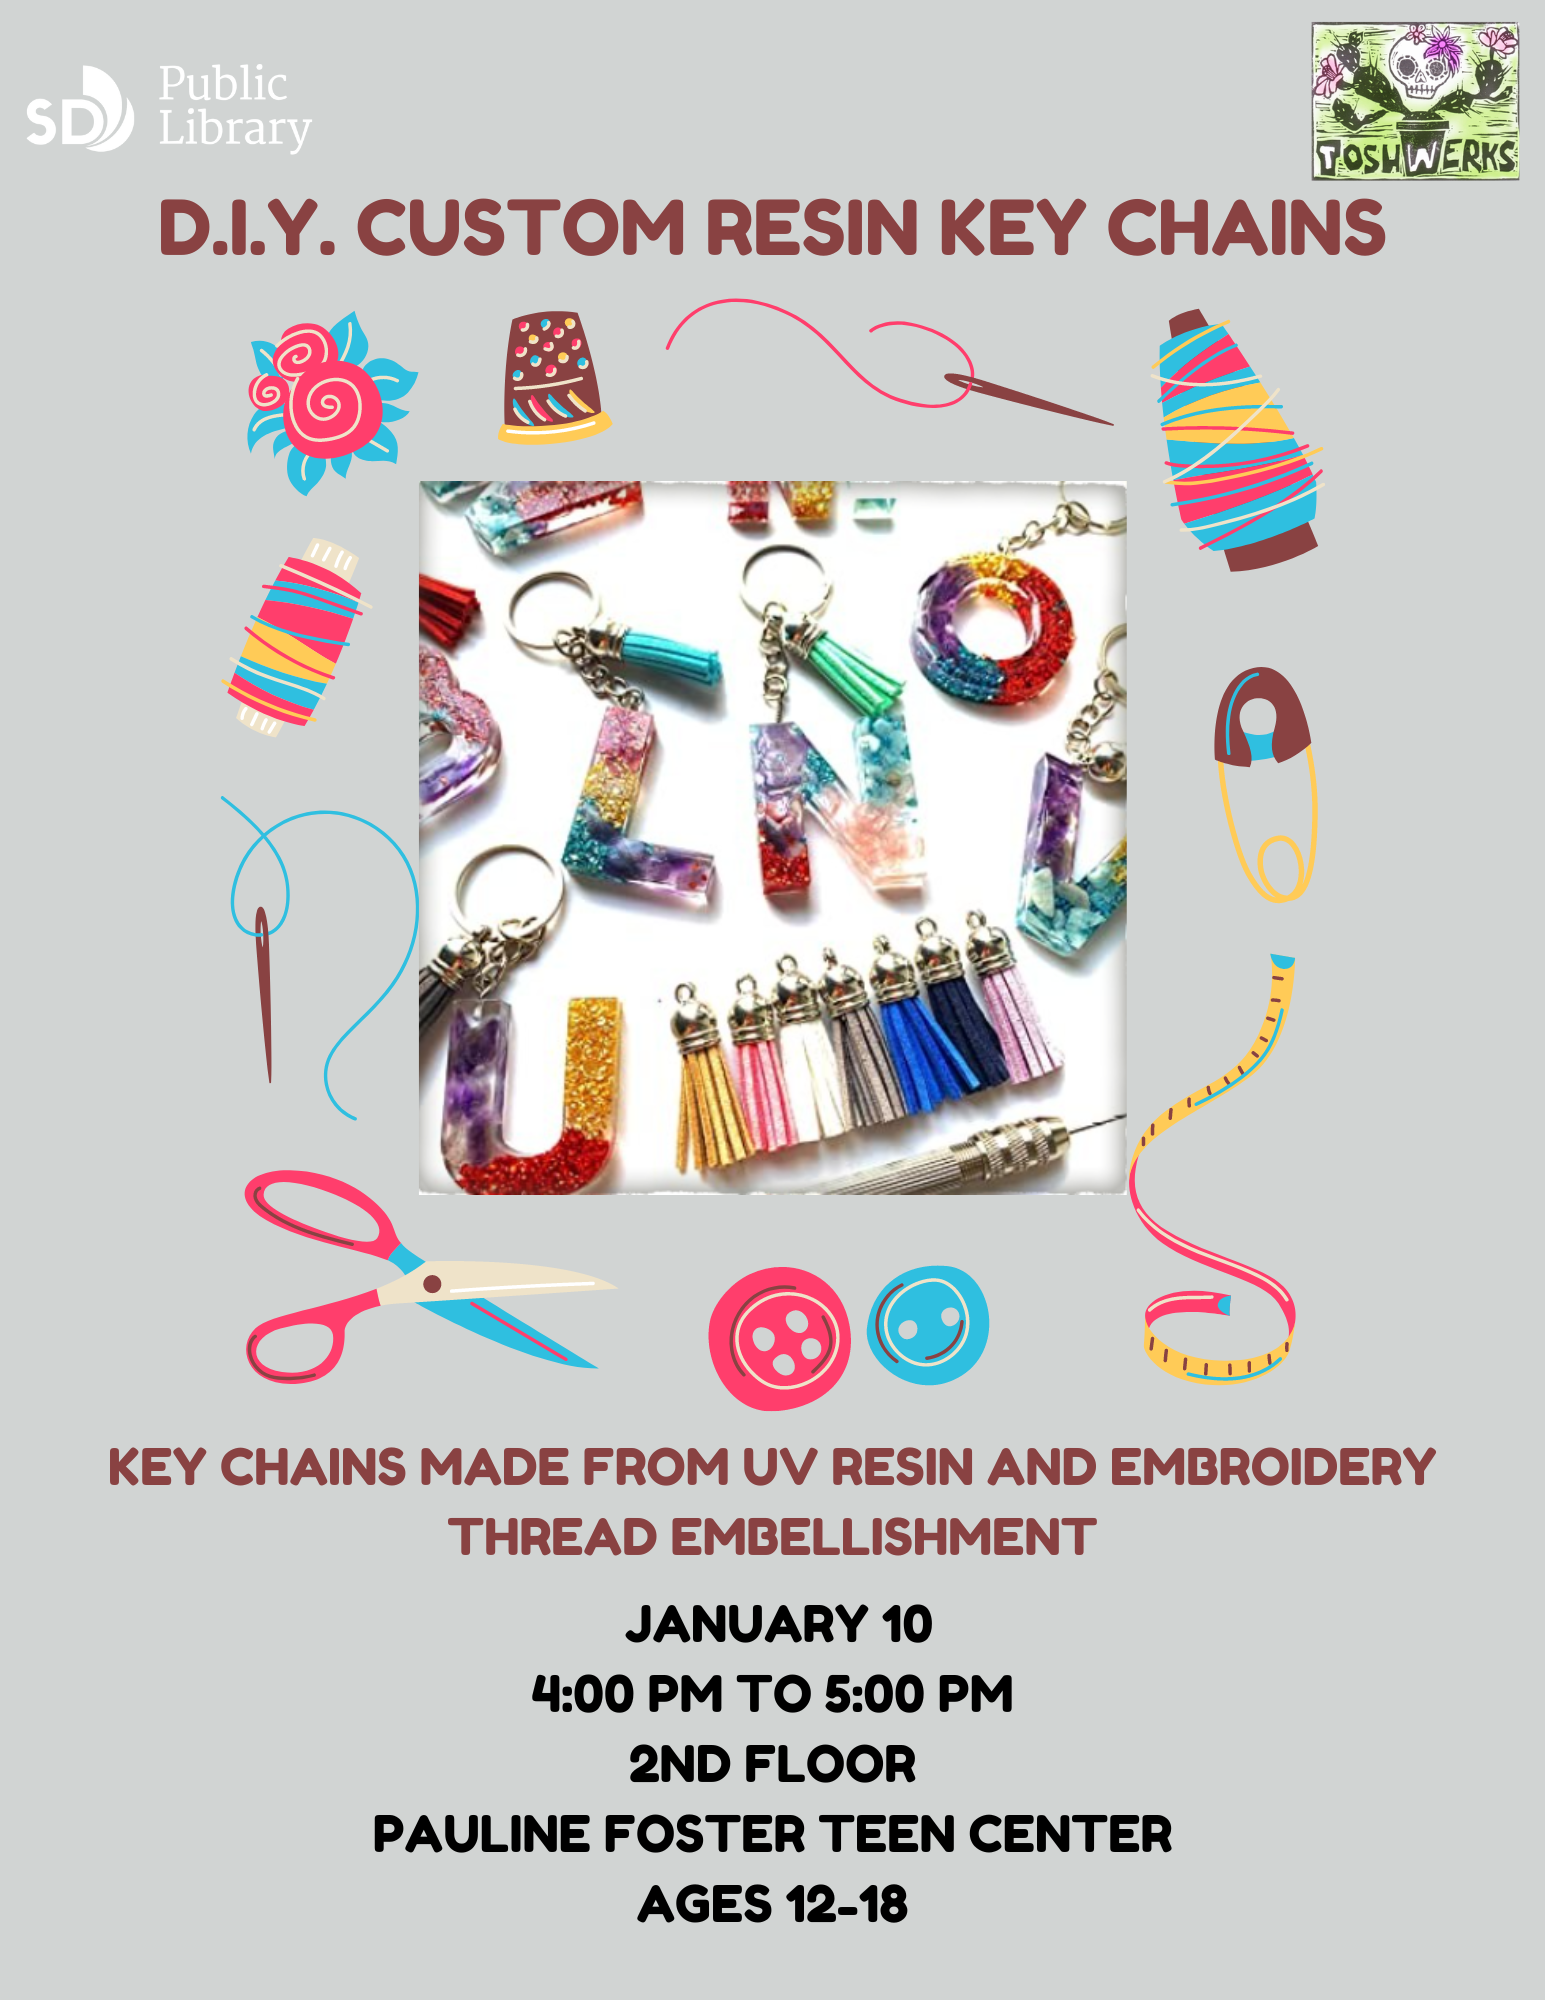 D.I.Y. Custom Resin Key Chains. Key chains made from uv resin and embroidery thread embellishment. January 10, 4:00-5:00PM, 2nd floor, Pauline Foster Teen Center, Ages 12-18.